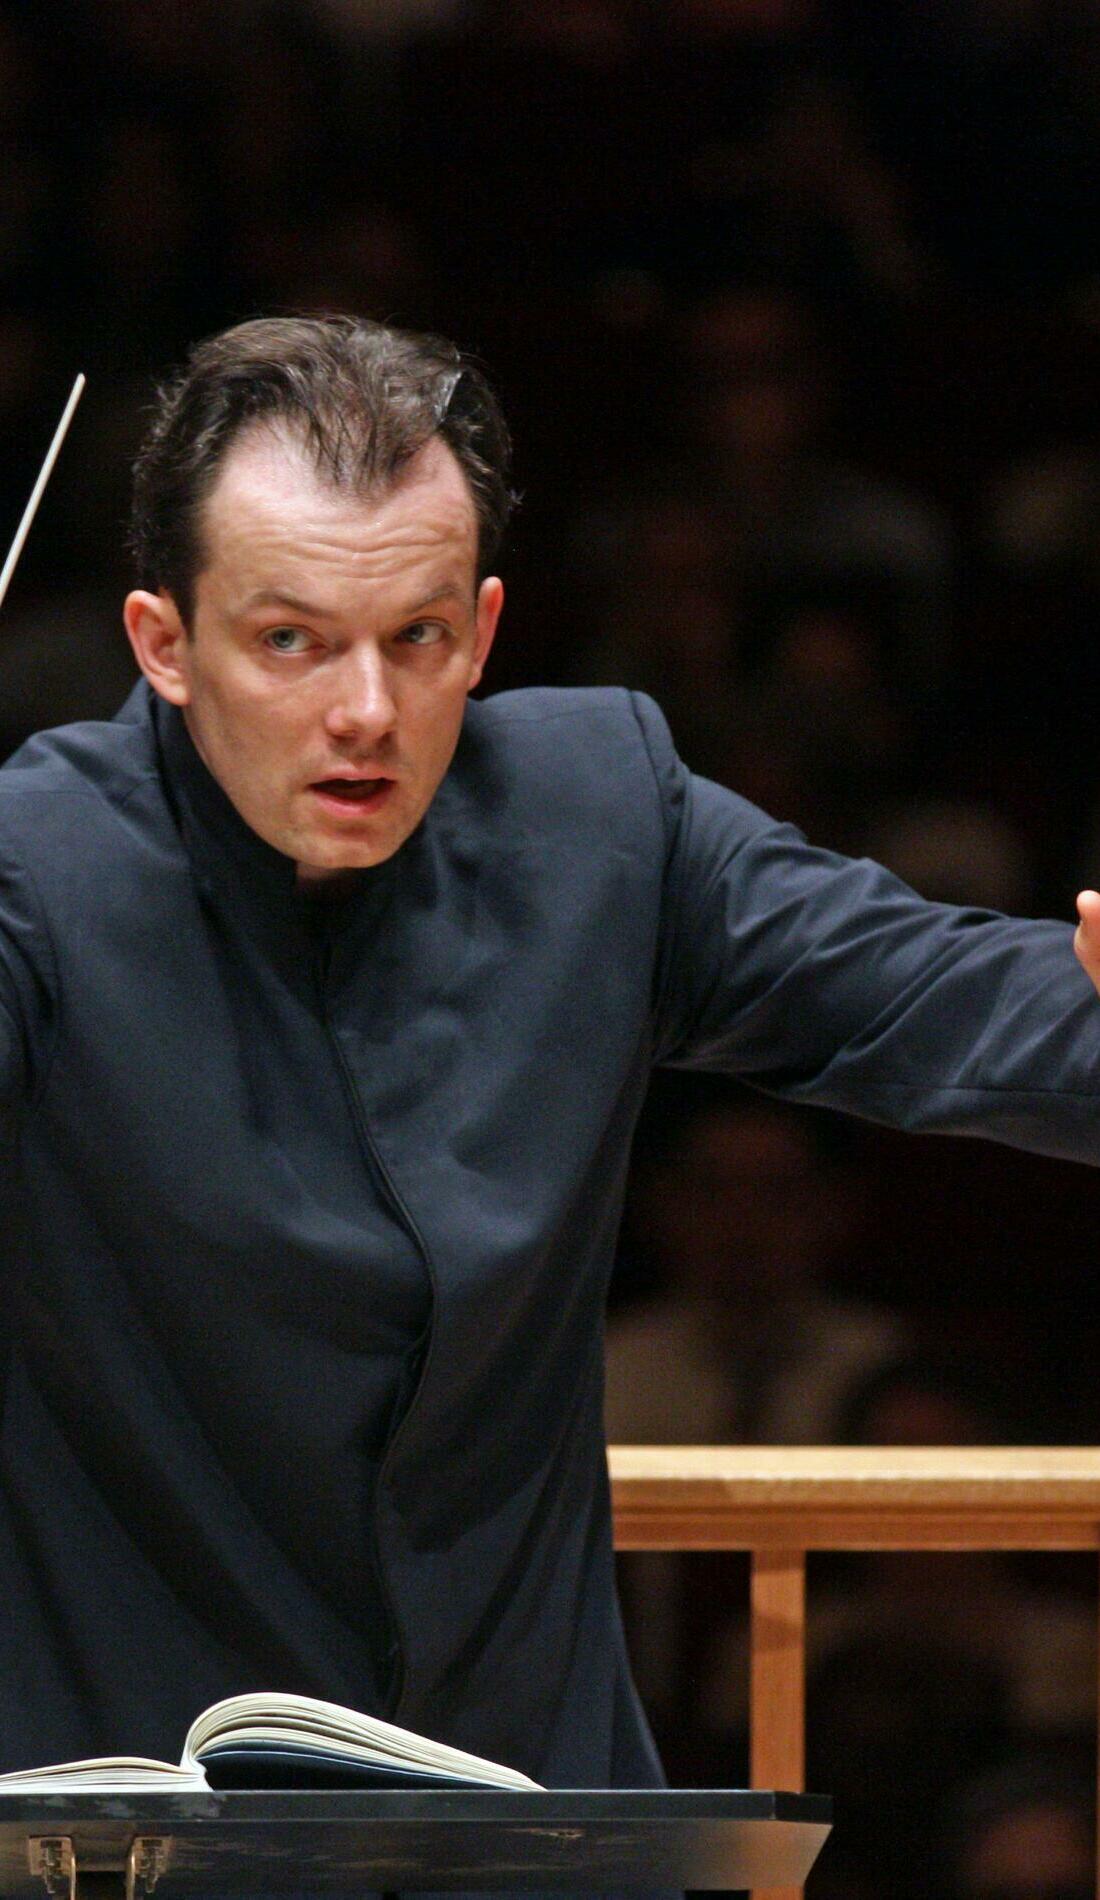 A Andris Nelsons live event